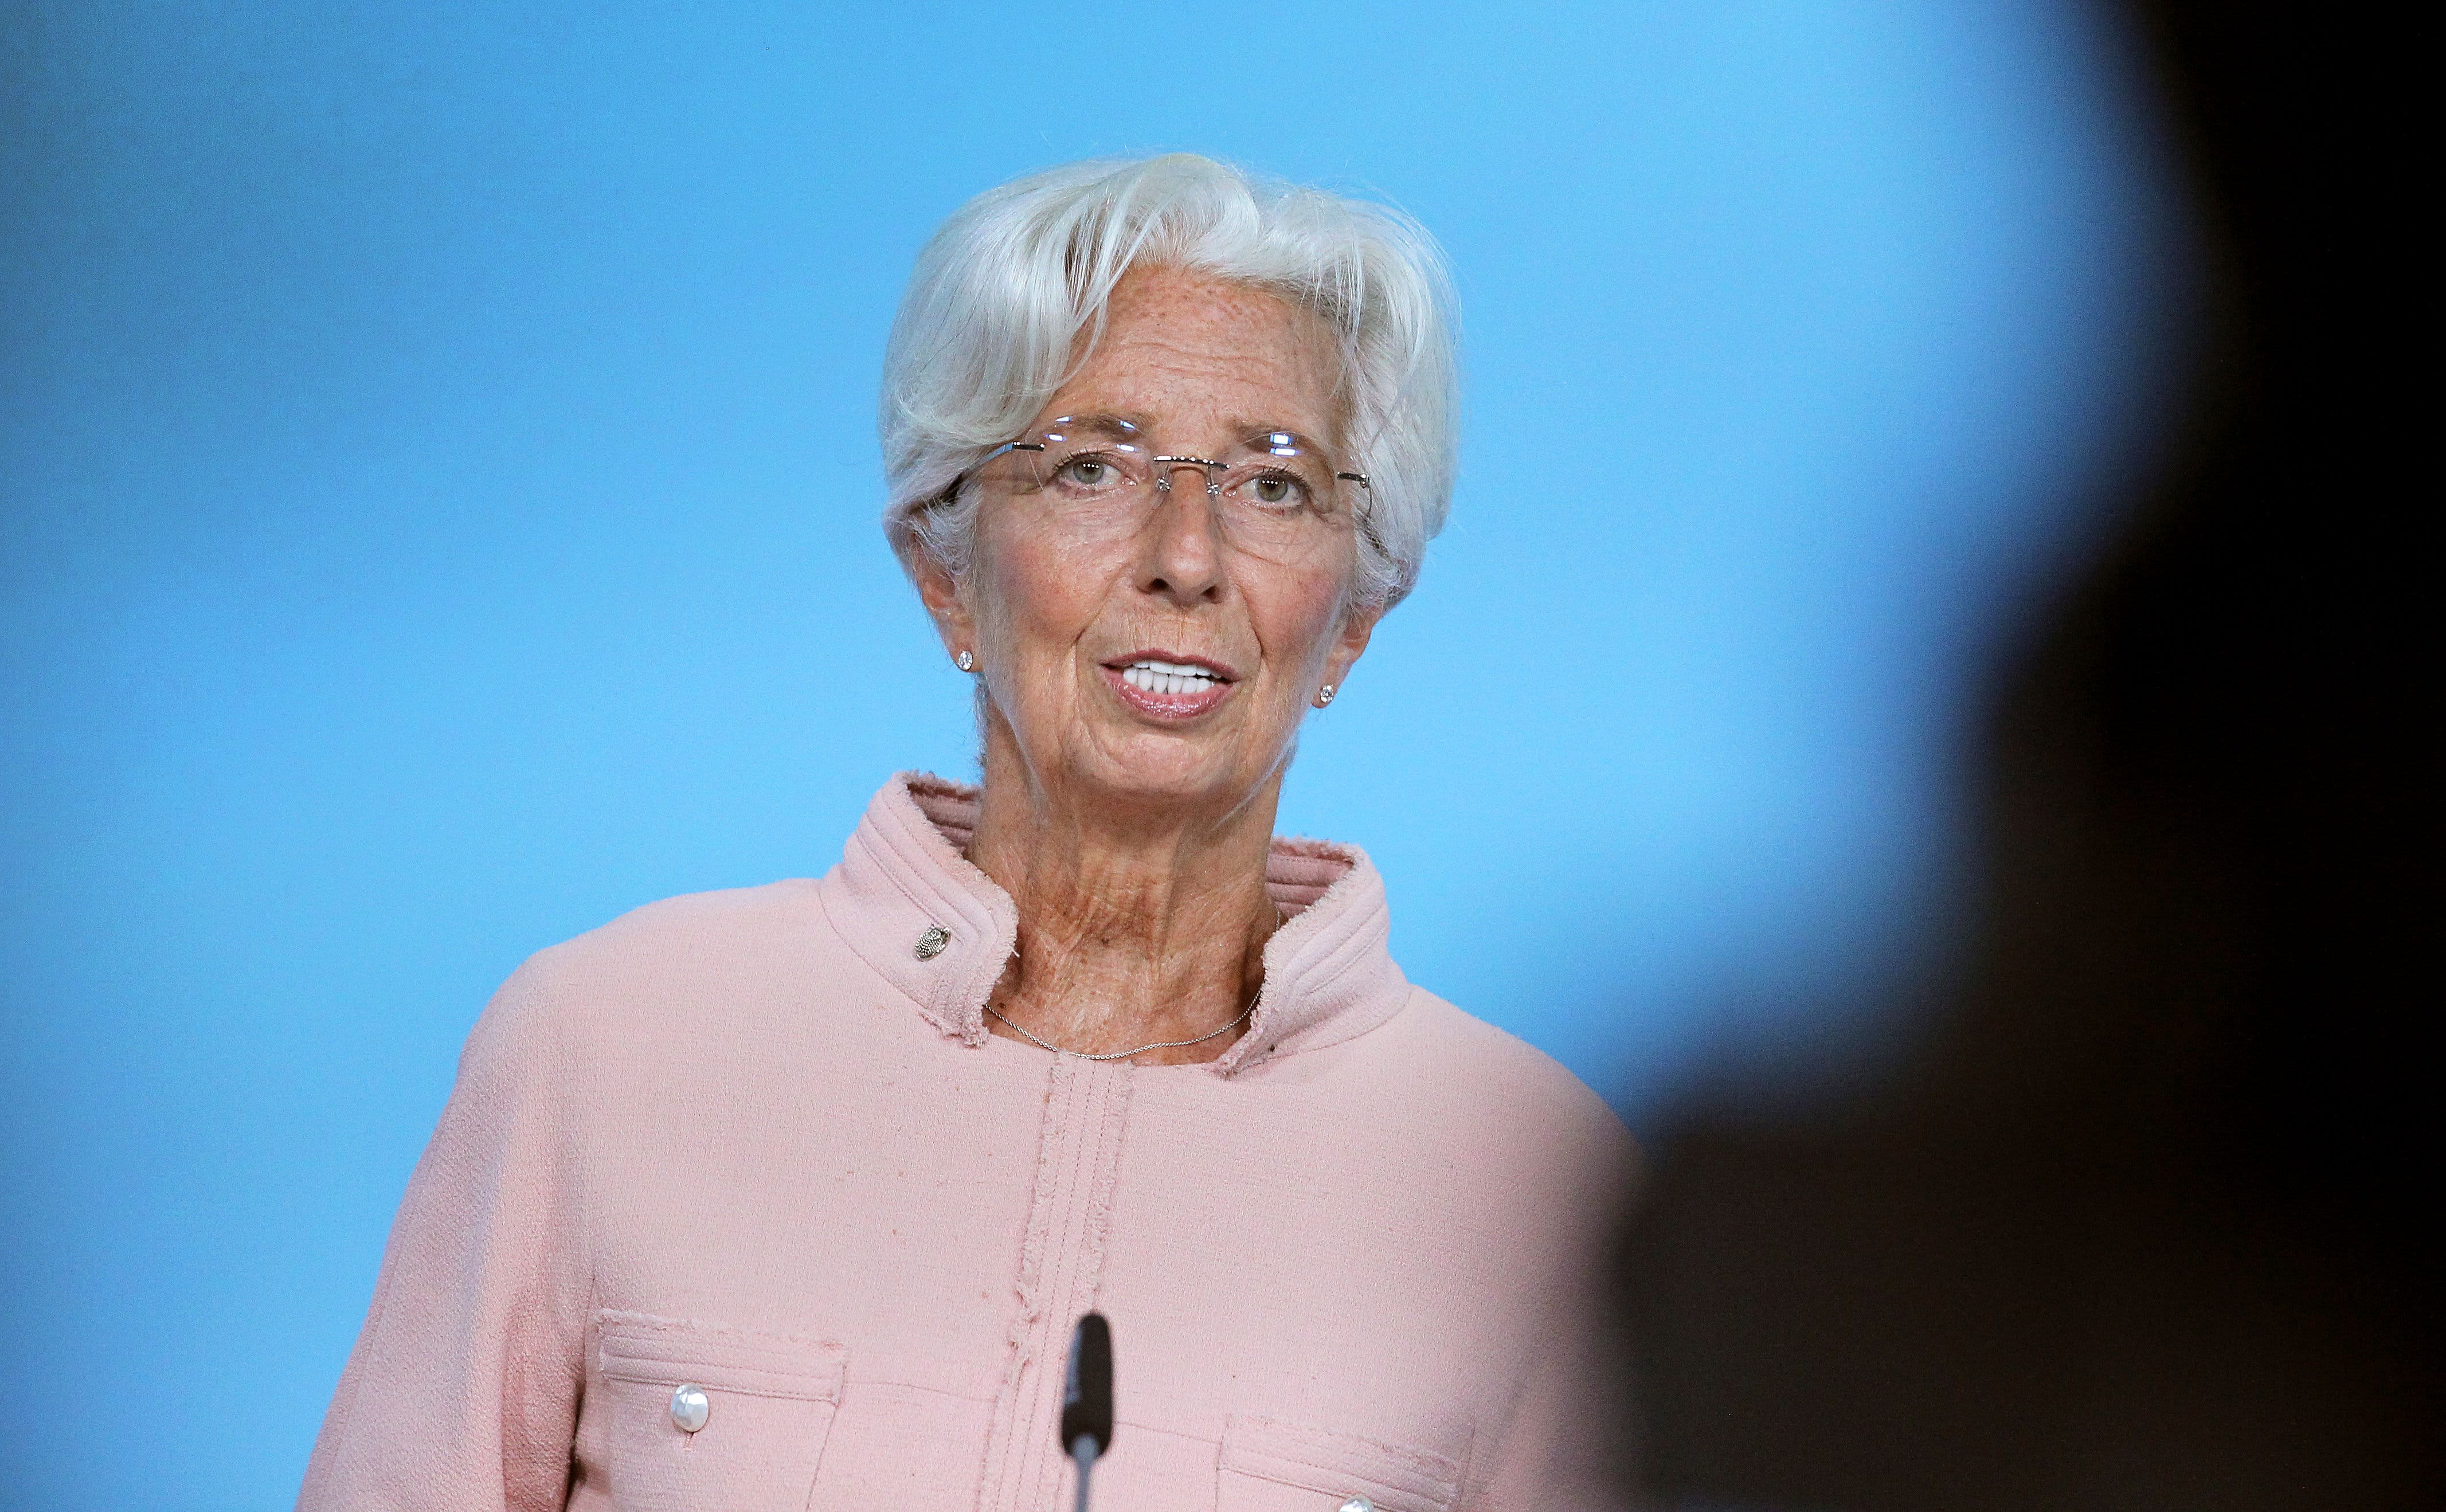 ECB’s Lagarde says a rate hike unlikely for 2022; euro slides – CNBC